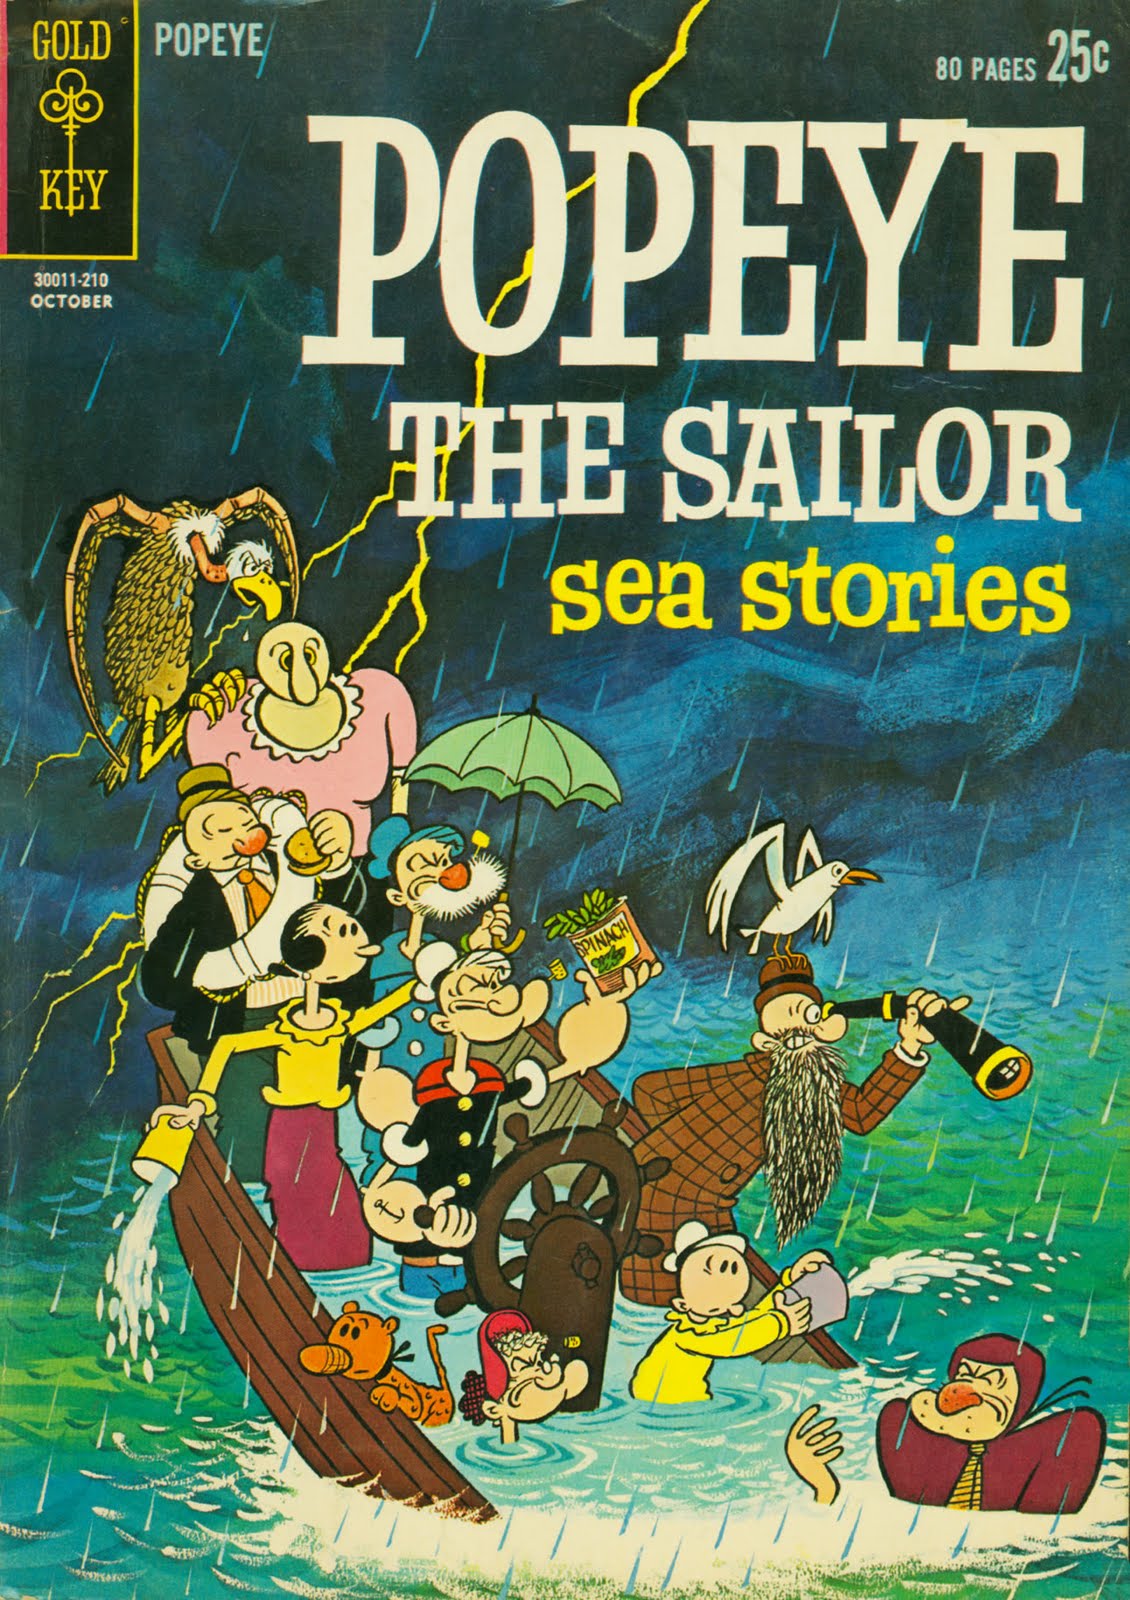 Sea stories. Cold Popeye the Sailor. Cold Popeye. Popeye and Olive Comic. Sailor at Sea.